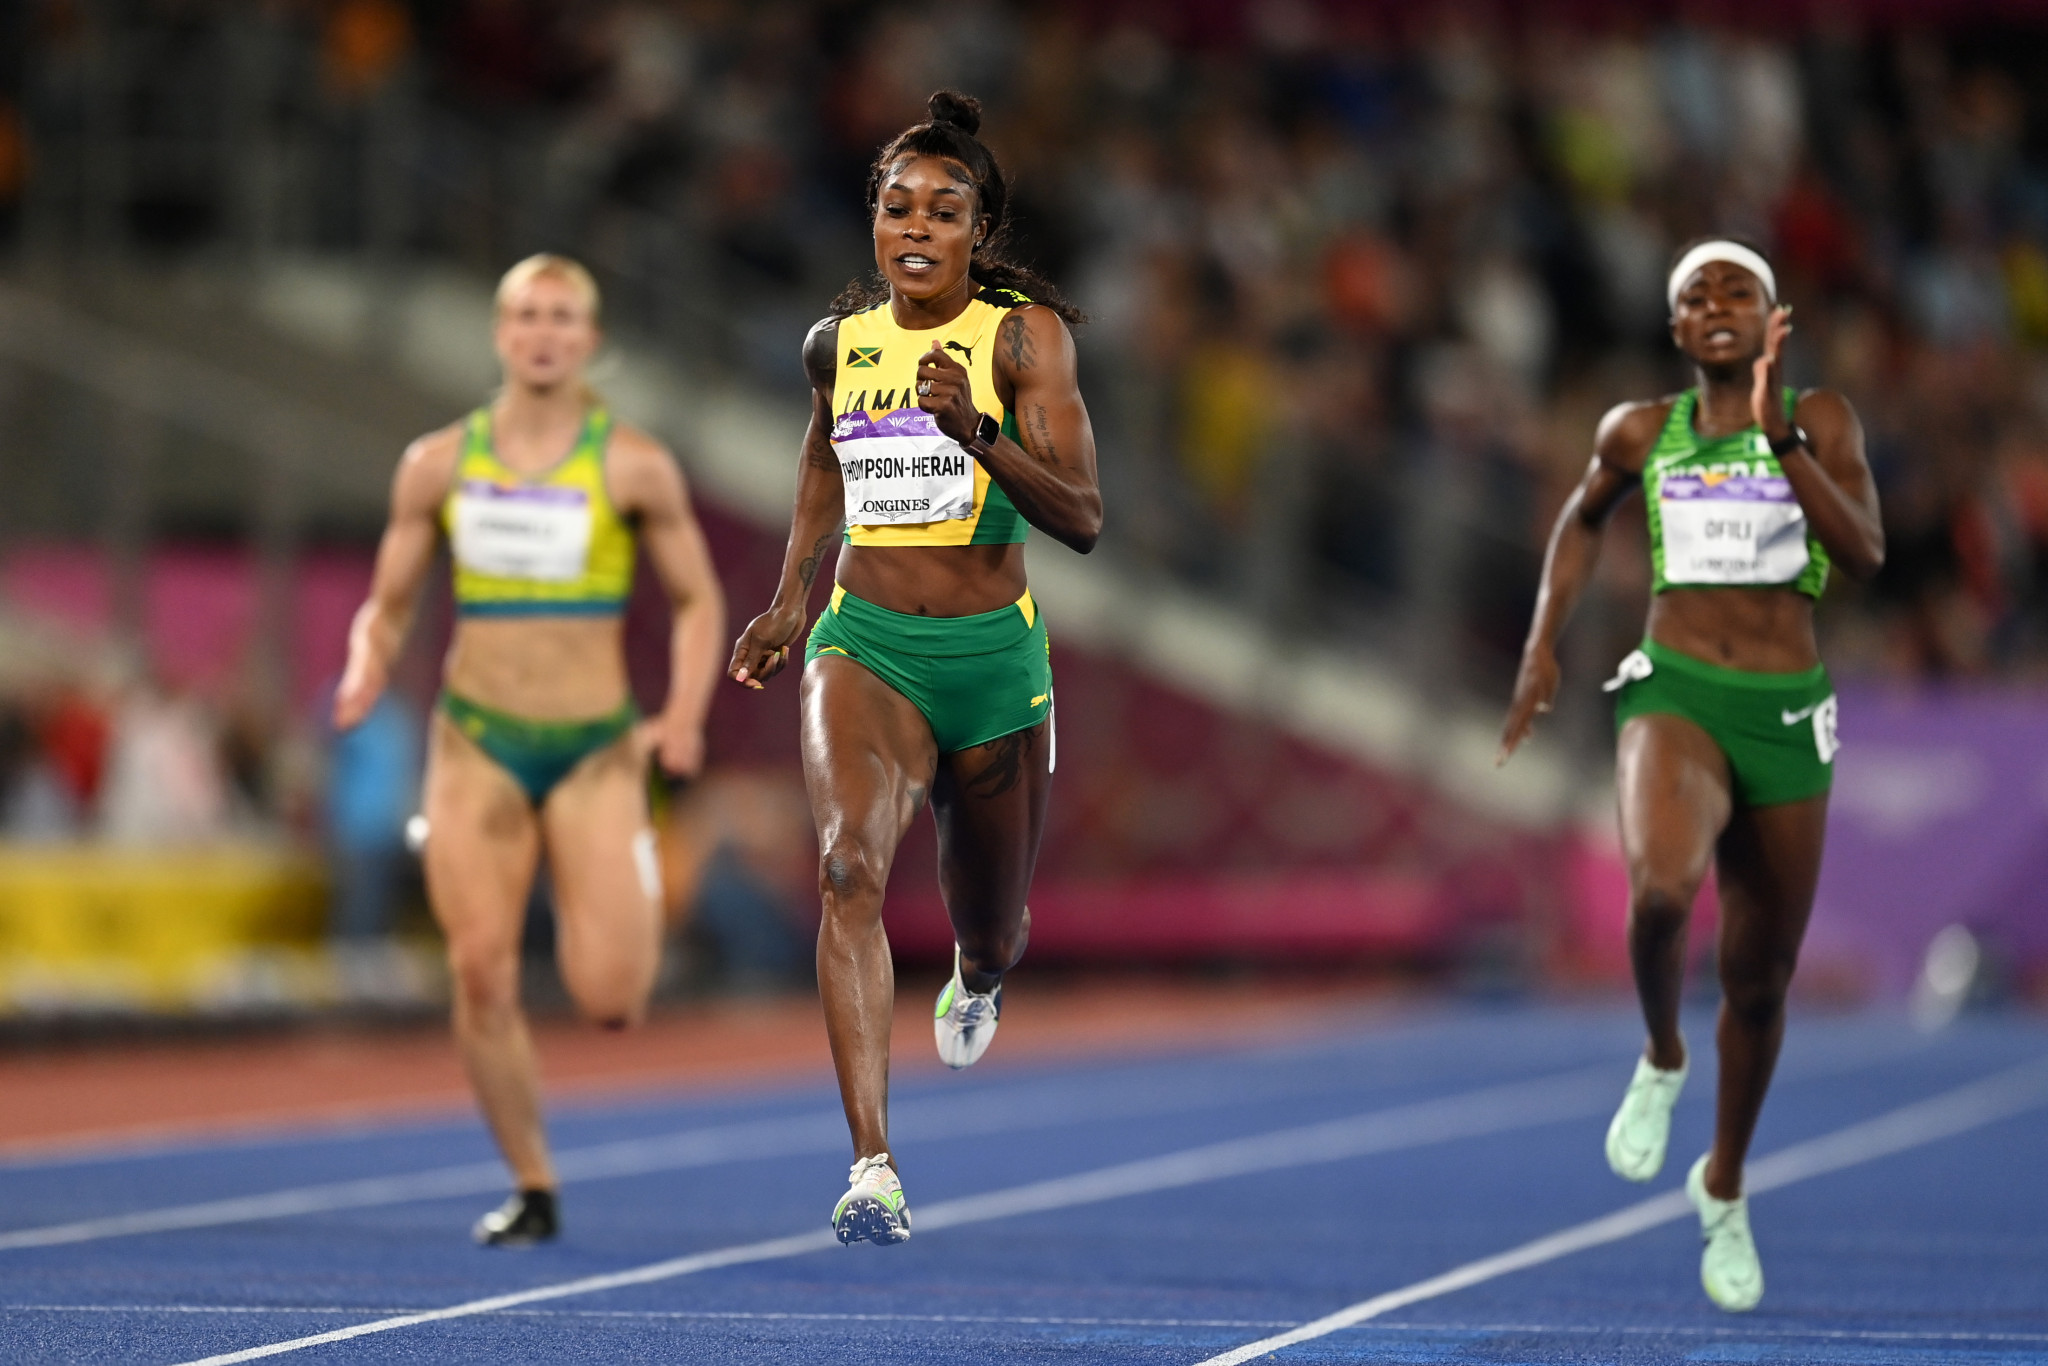 Jamaica's Elaine Thompson-Herah, the fastest woman alive, faces her Jamaican compatriot Shelly-Ann Fraser-Pryce at the Lausanne Diamond League meeting tomorrow ©Getty Images